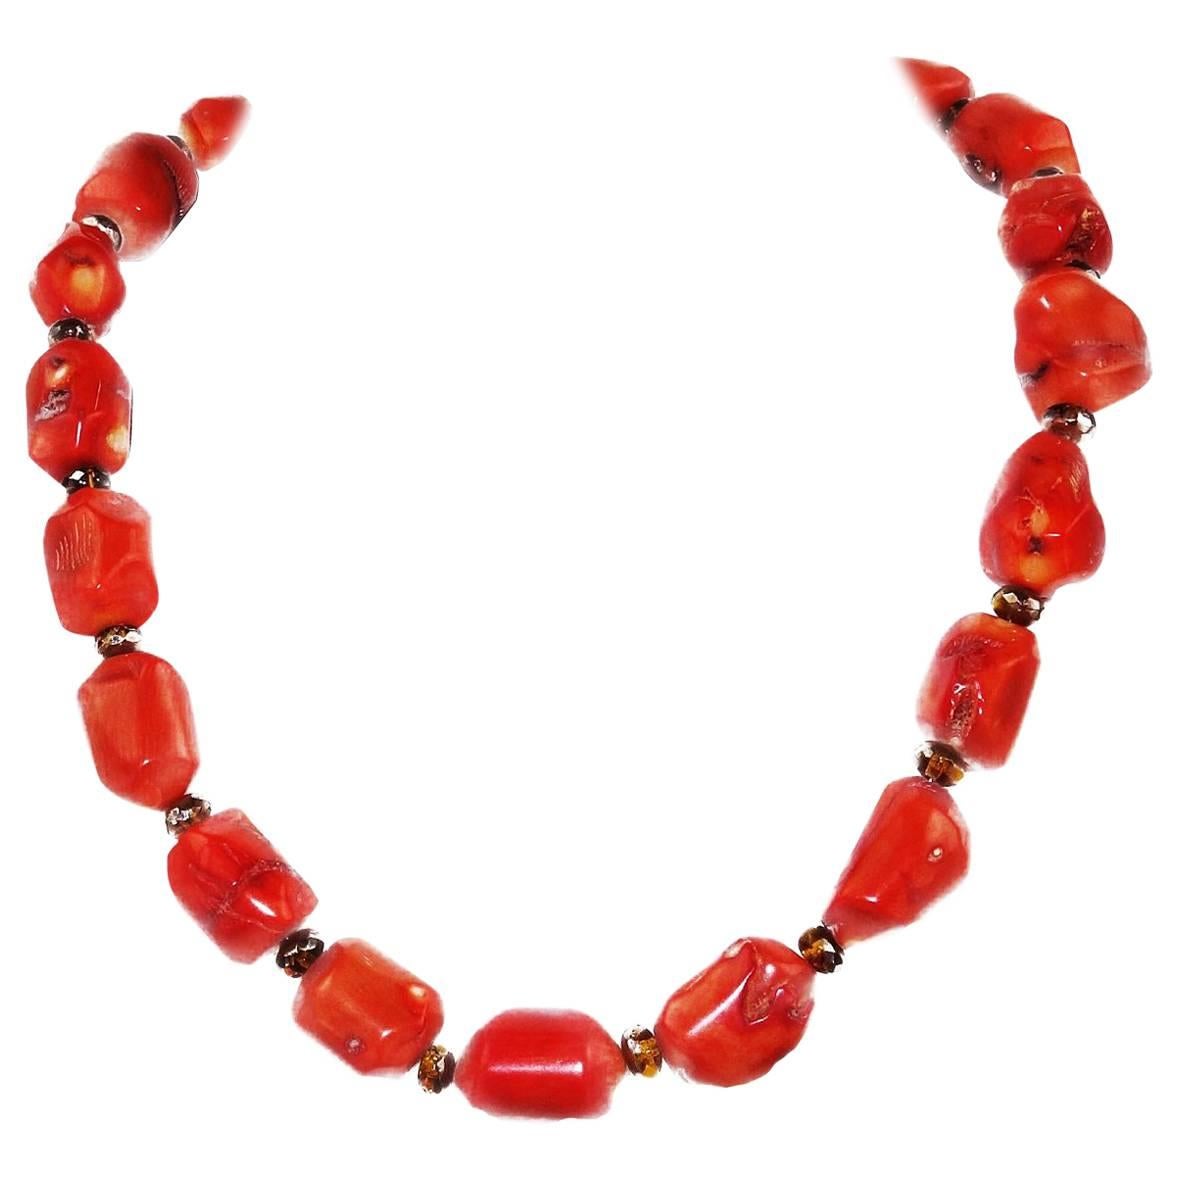 Unique orange polished bamboo coral necklace of slightly irregular tubes. (15x13mm), accented with sparkly gold spacers and a gold-tone hook clasp. Handmade perfection to complete your fall/winter ensembles. Length: 19.5in Clasp: Gold-tone, hook. 
